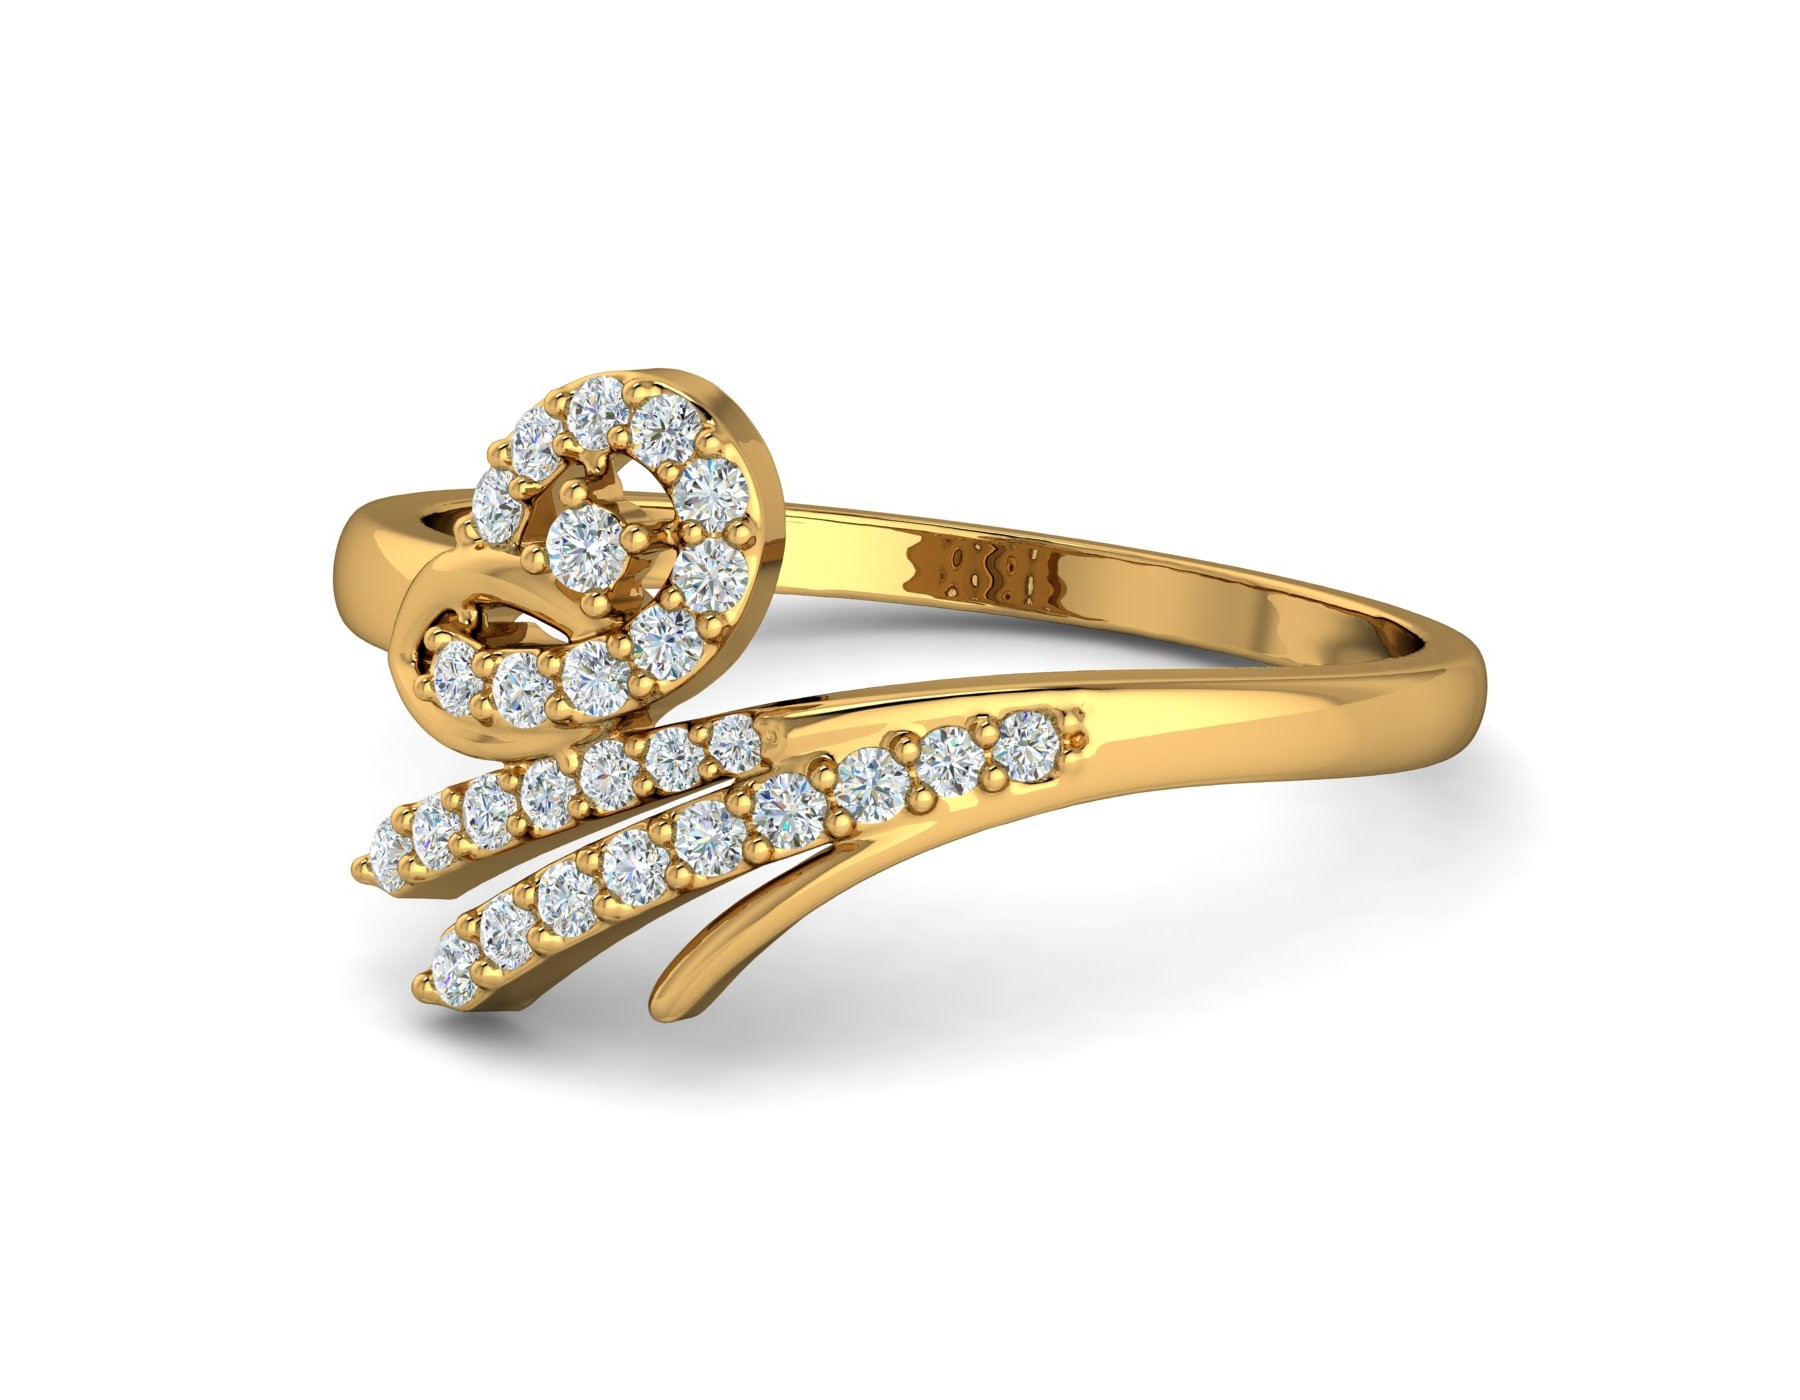 Sree Kumaran | 22K Gold Casting Ring Signature Collection for Girl's